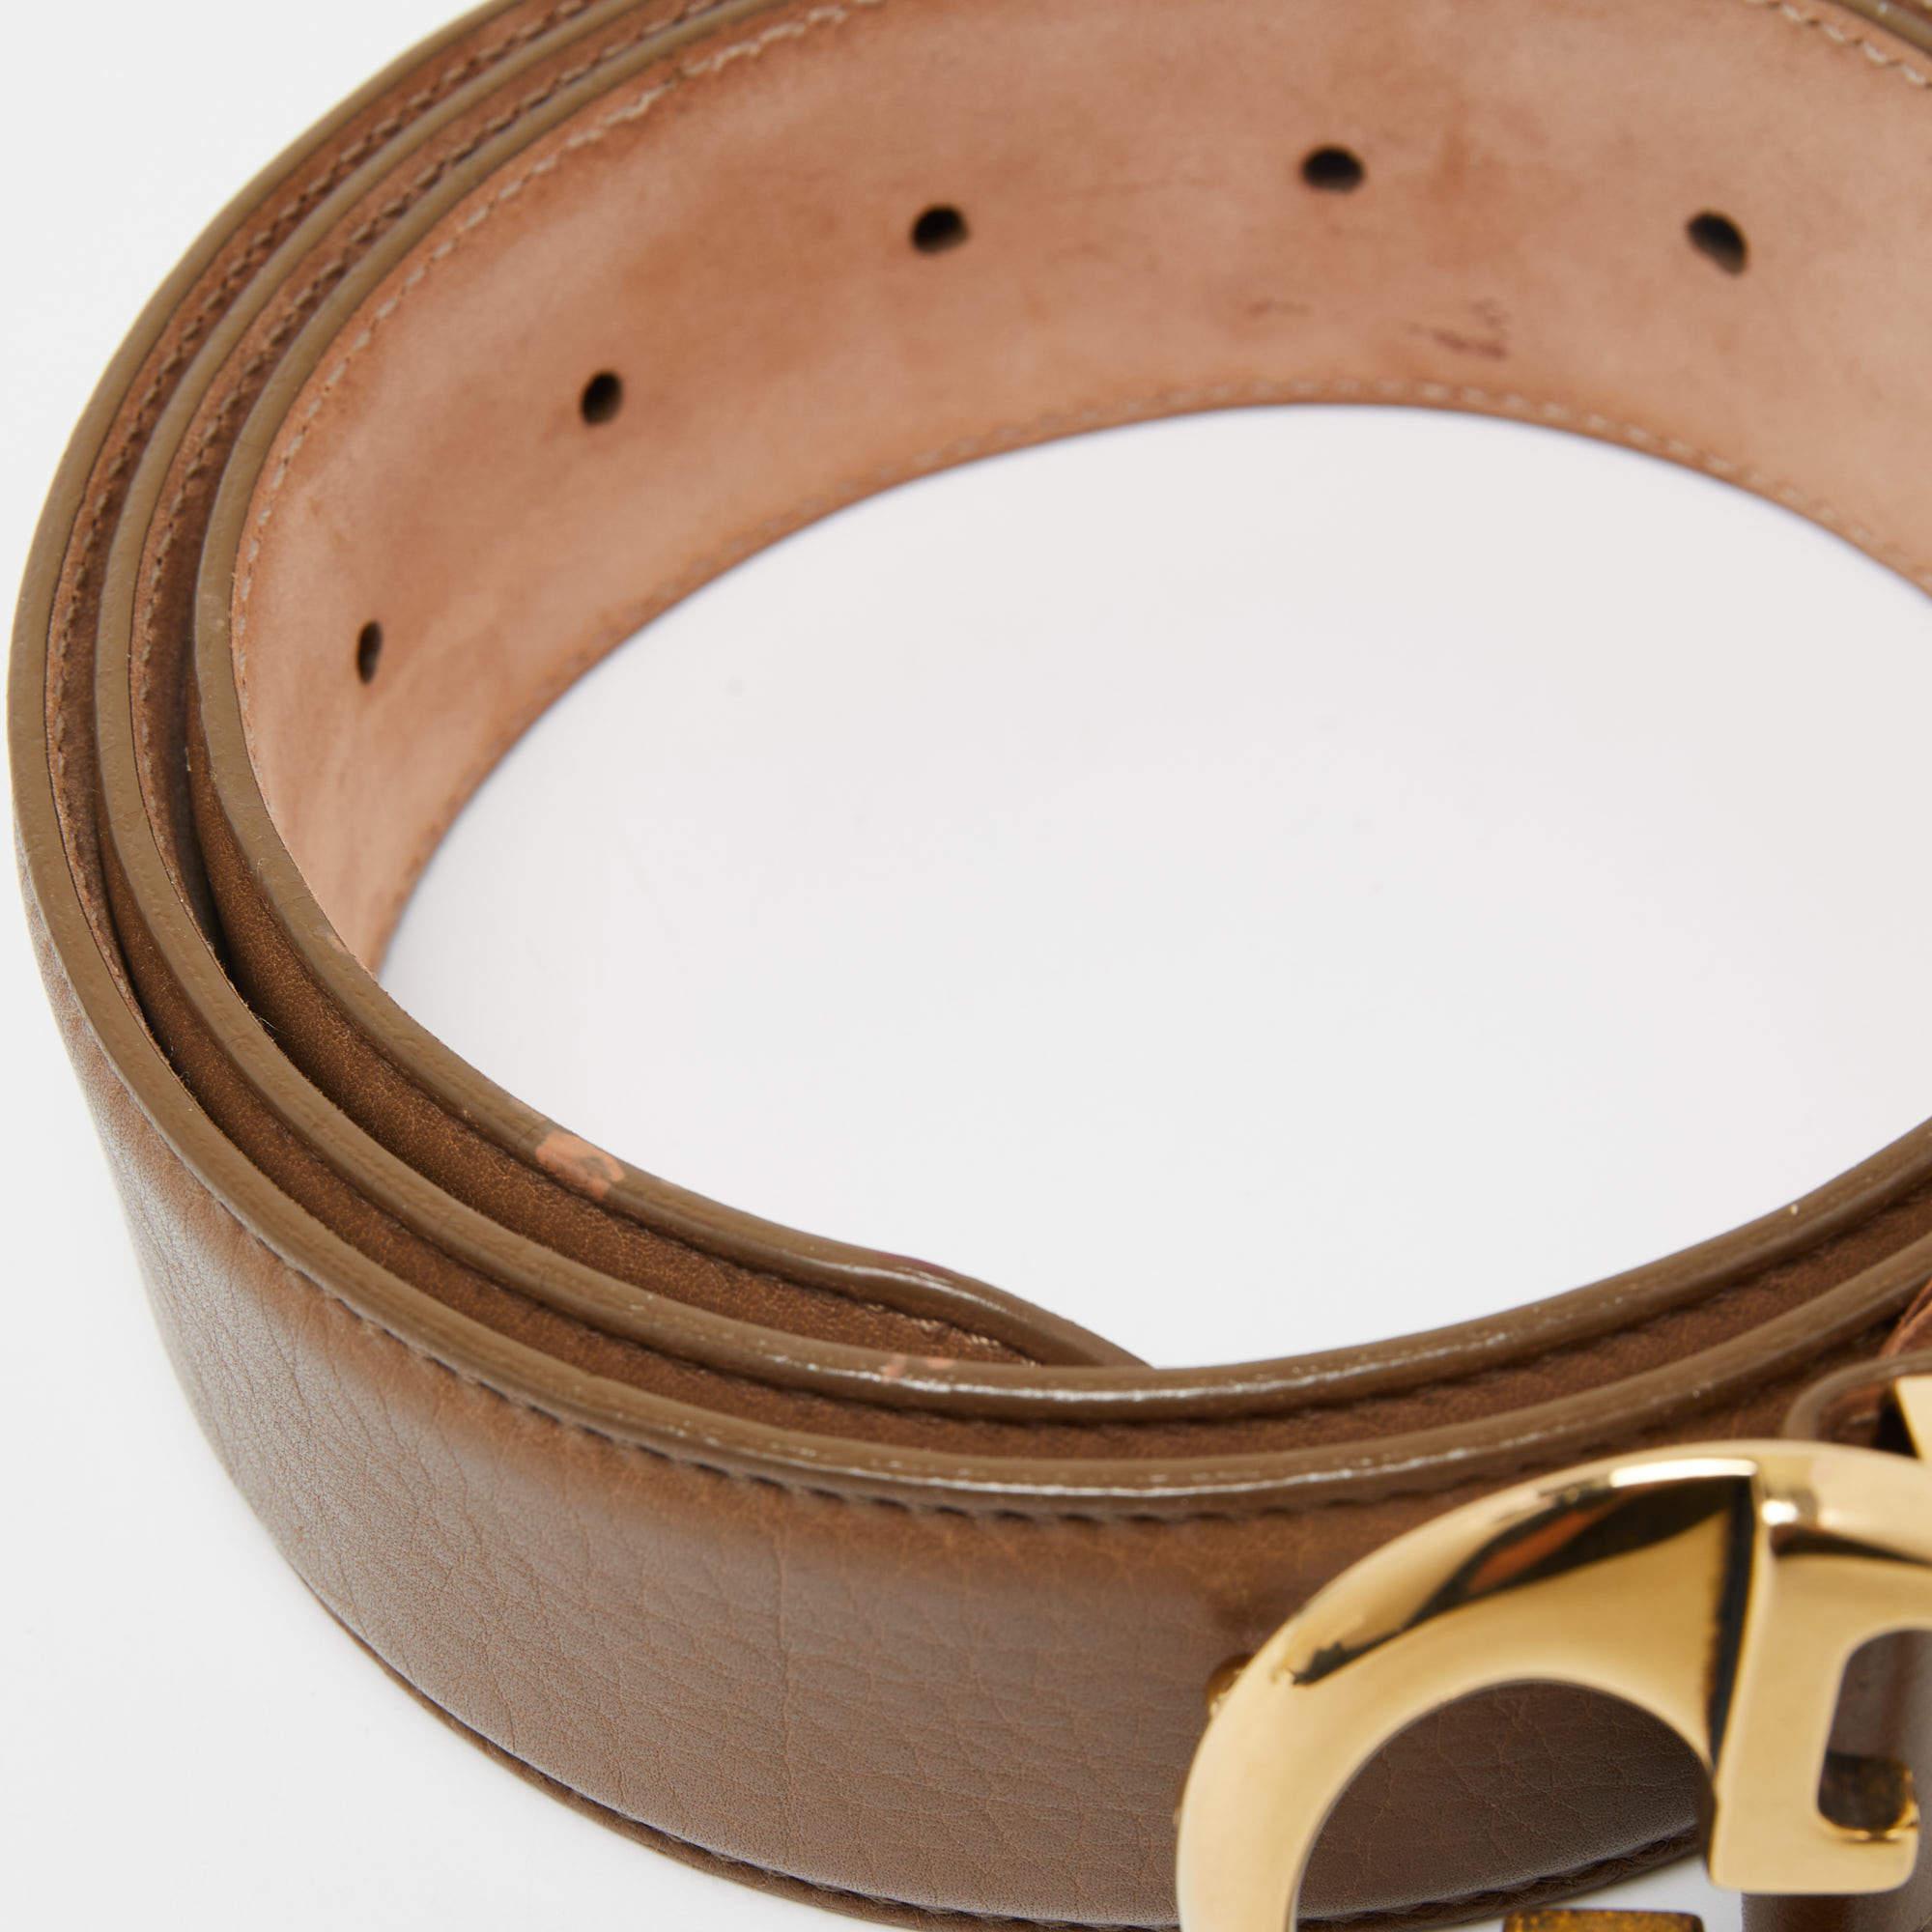 This Gucci belt is certainly worth the buy! Flaunting the classic gold-toned logo on brown leather, this belt has the power to add a luxurious slant to your ensemble.

